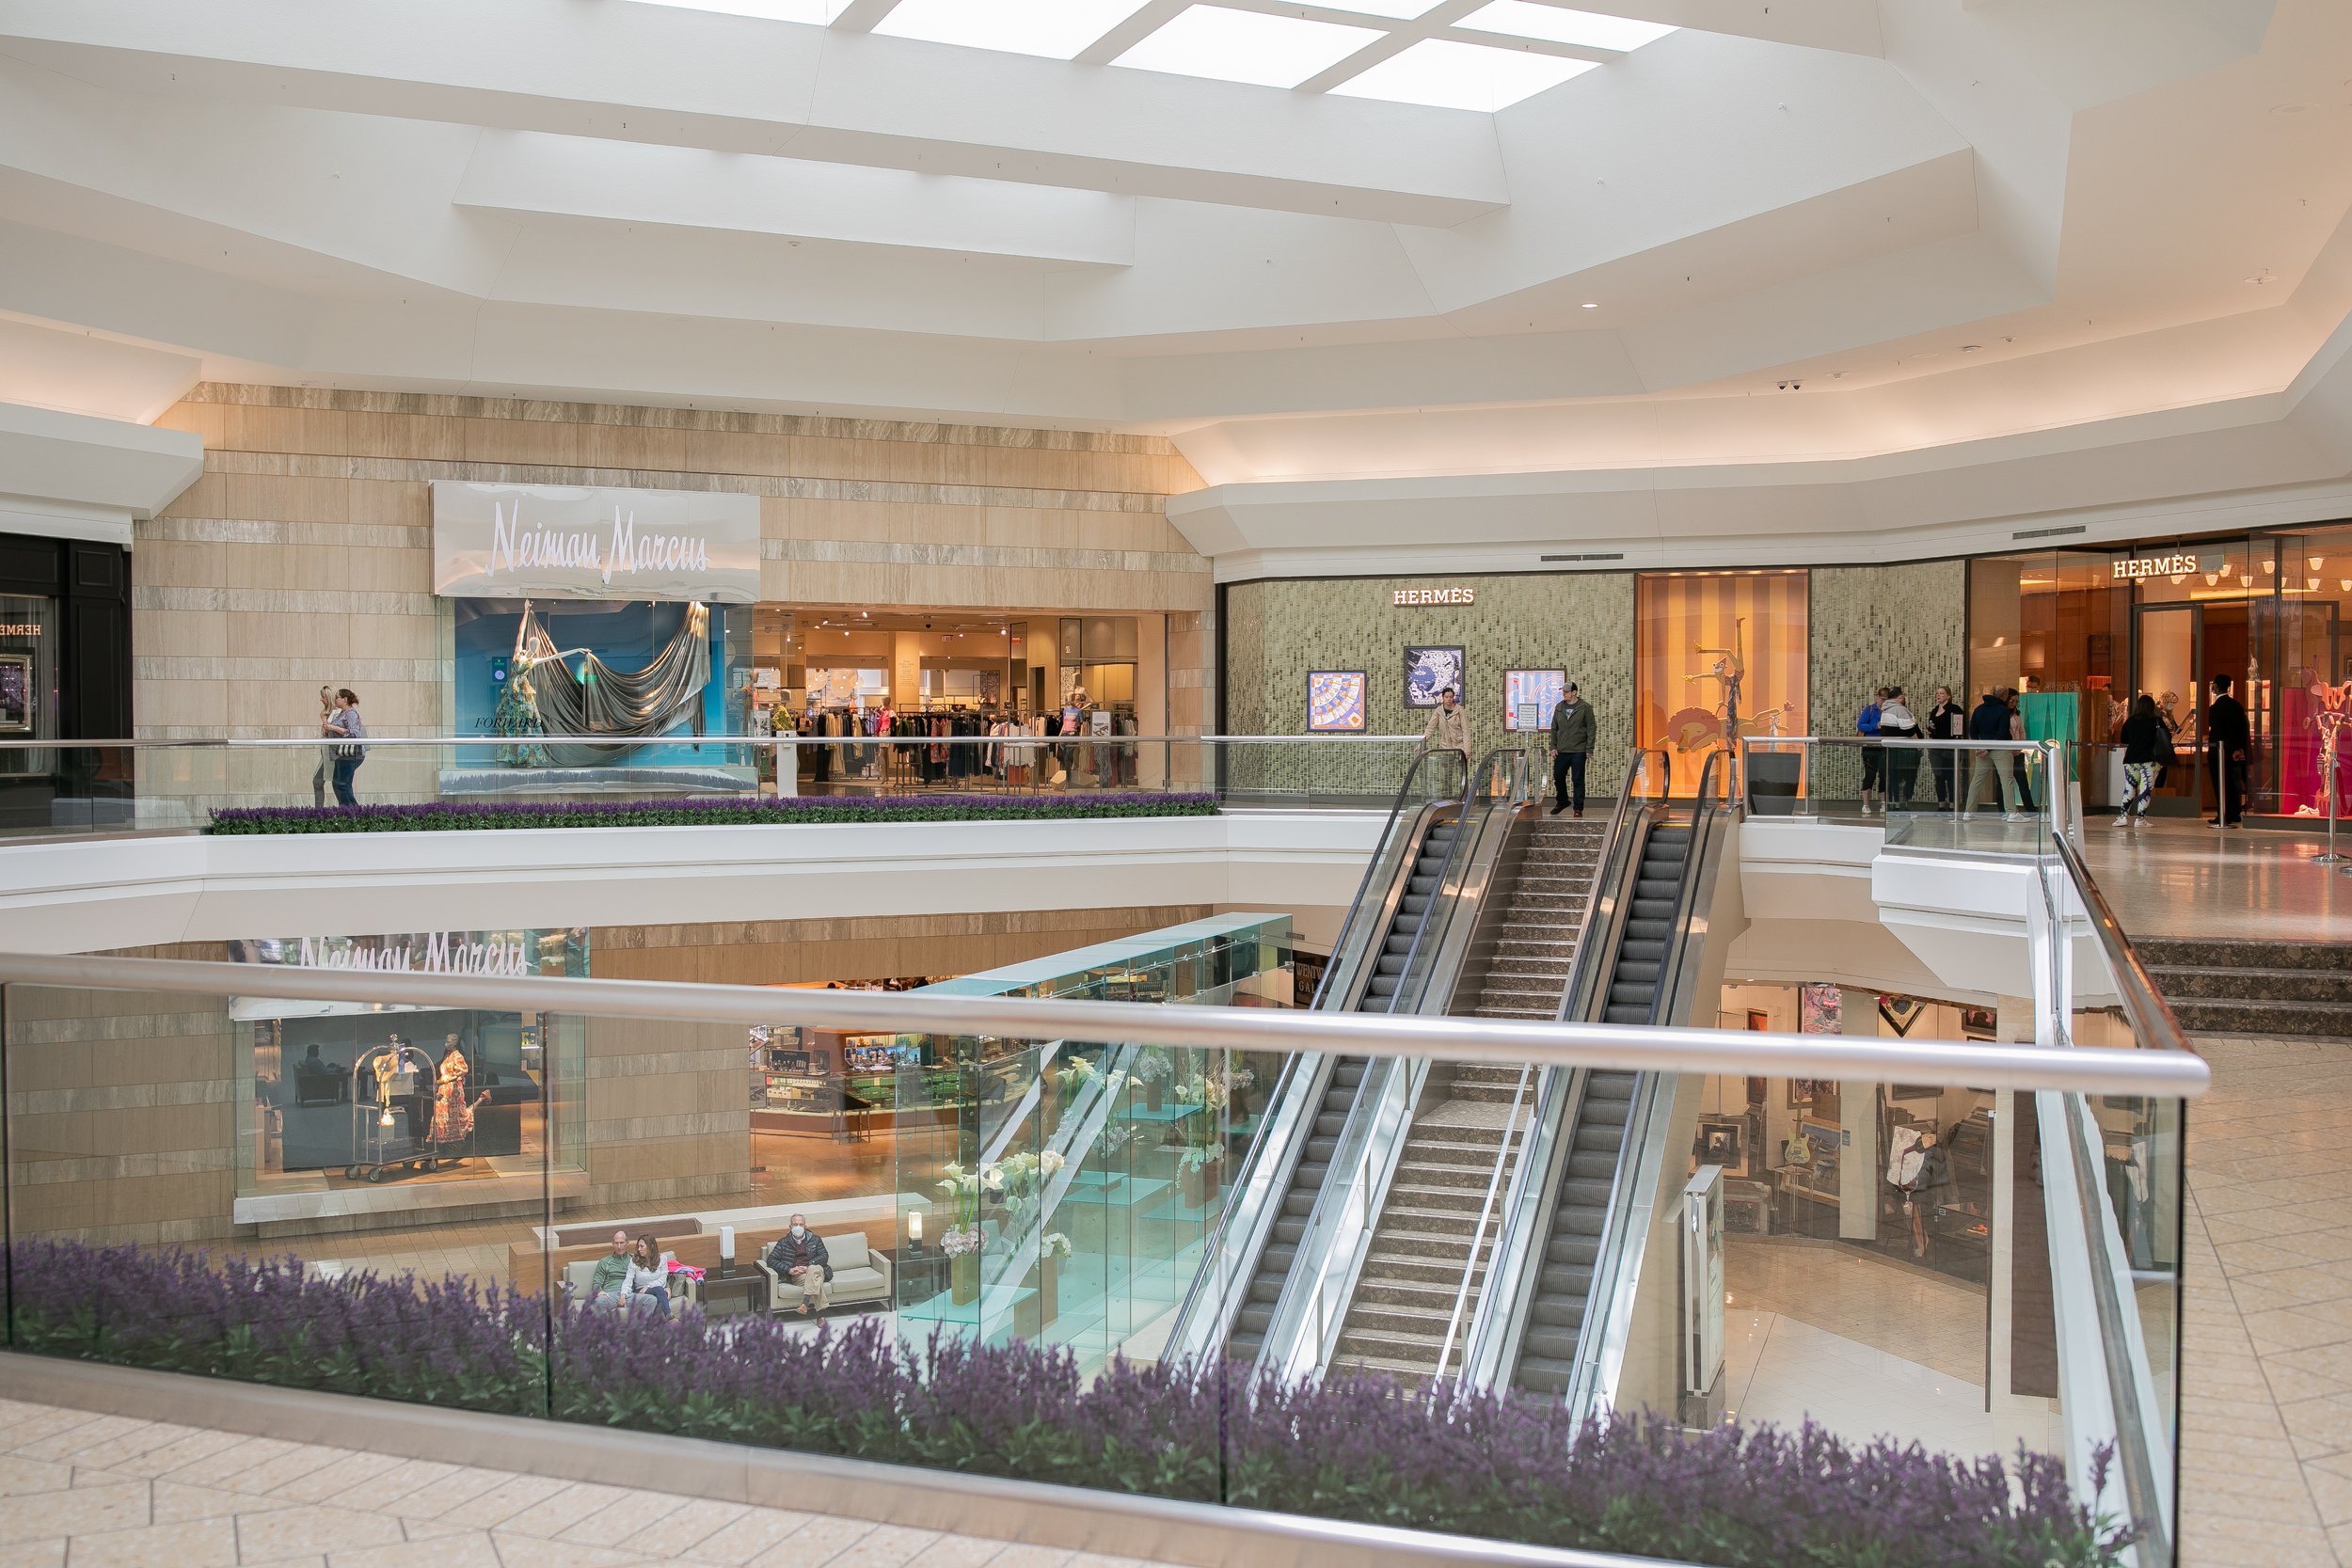 The Mall at Short Hills (150 stores) - shopping in Short Hills, New Jersey NJ  NJ 07078 - MallsCenters